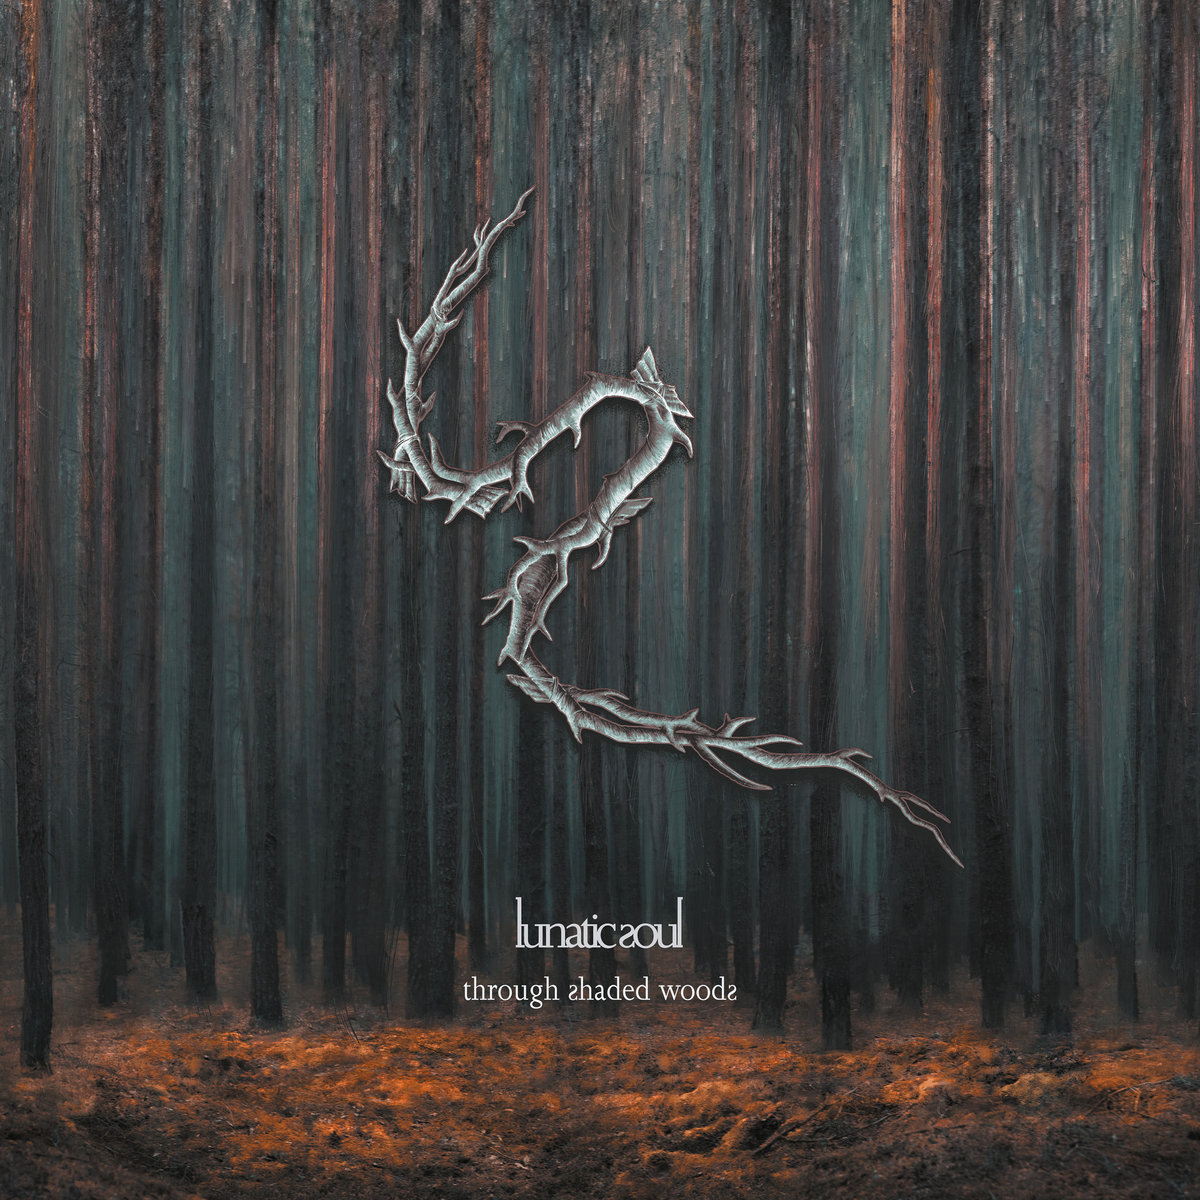 Lunatic Soul – Through Shaded Woods (Deluxe Edition) (2020) [FLAC 24bit/44,1kHz]